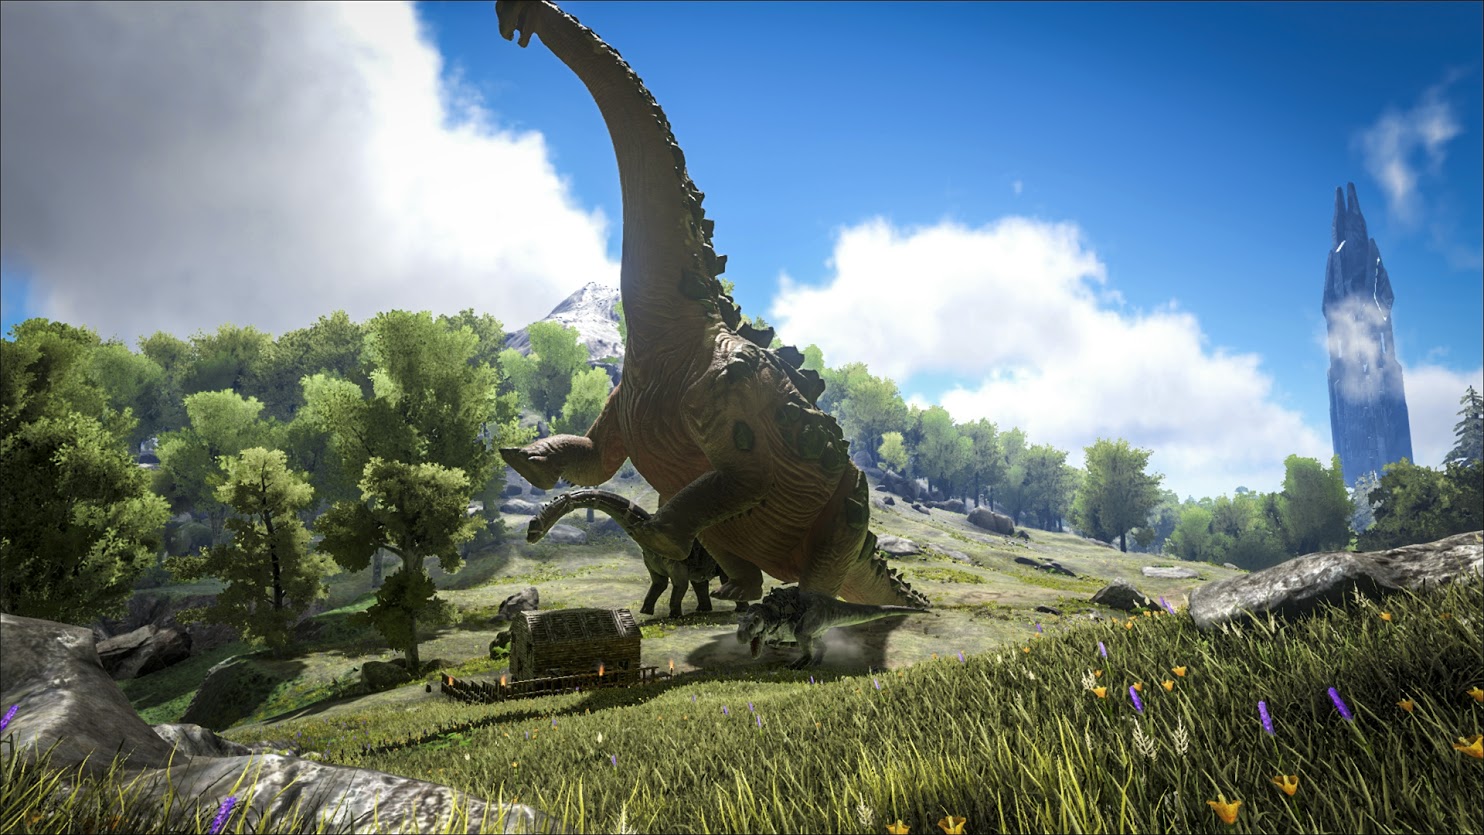 Ark: Survival Evolved' is now free to download on iOS and Android